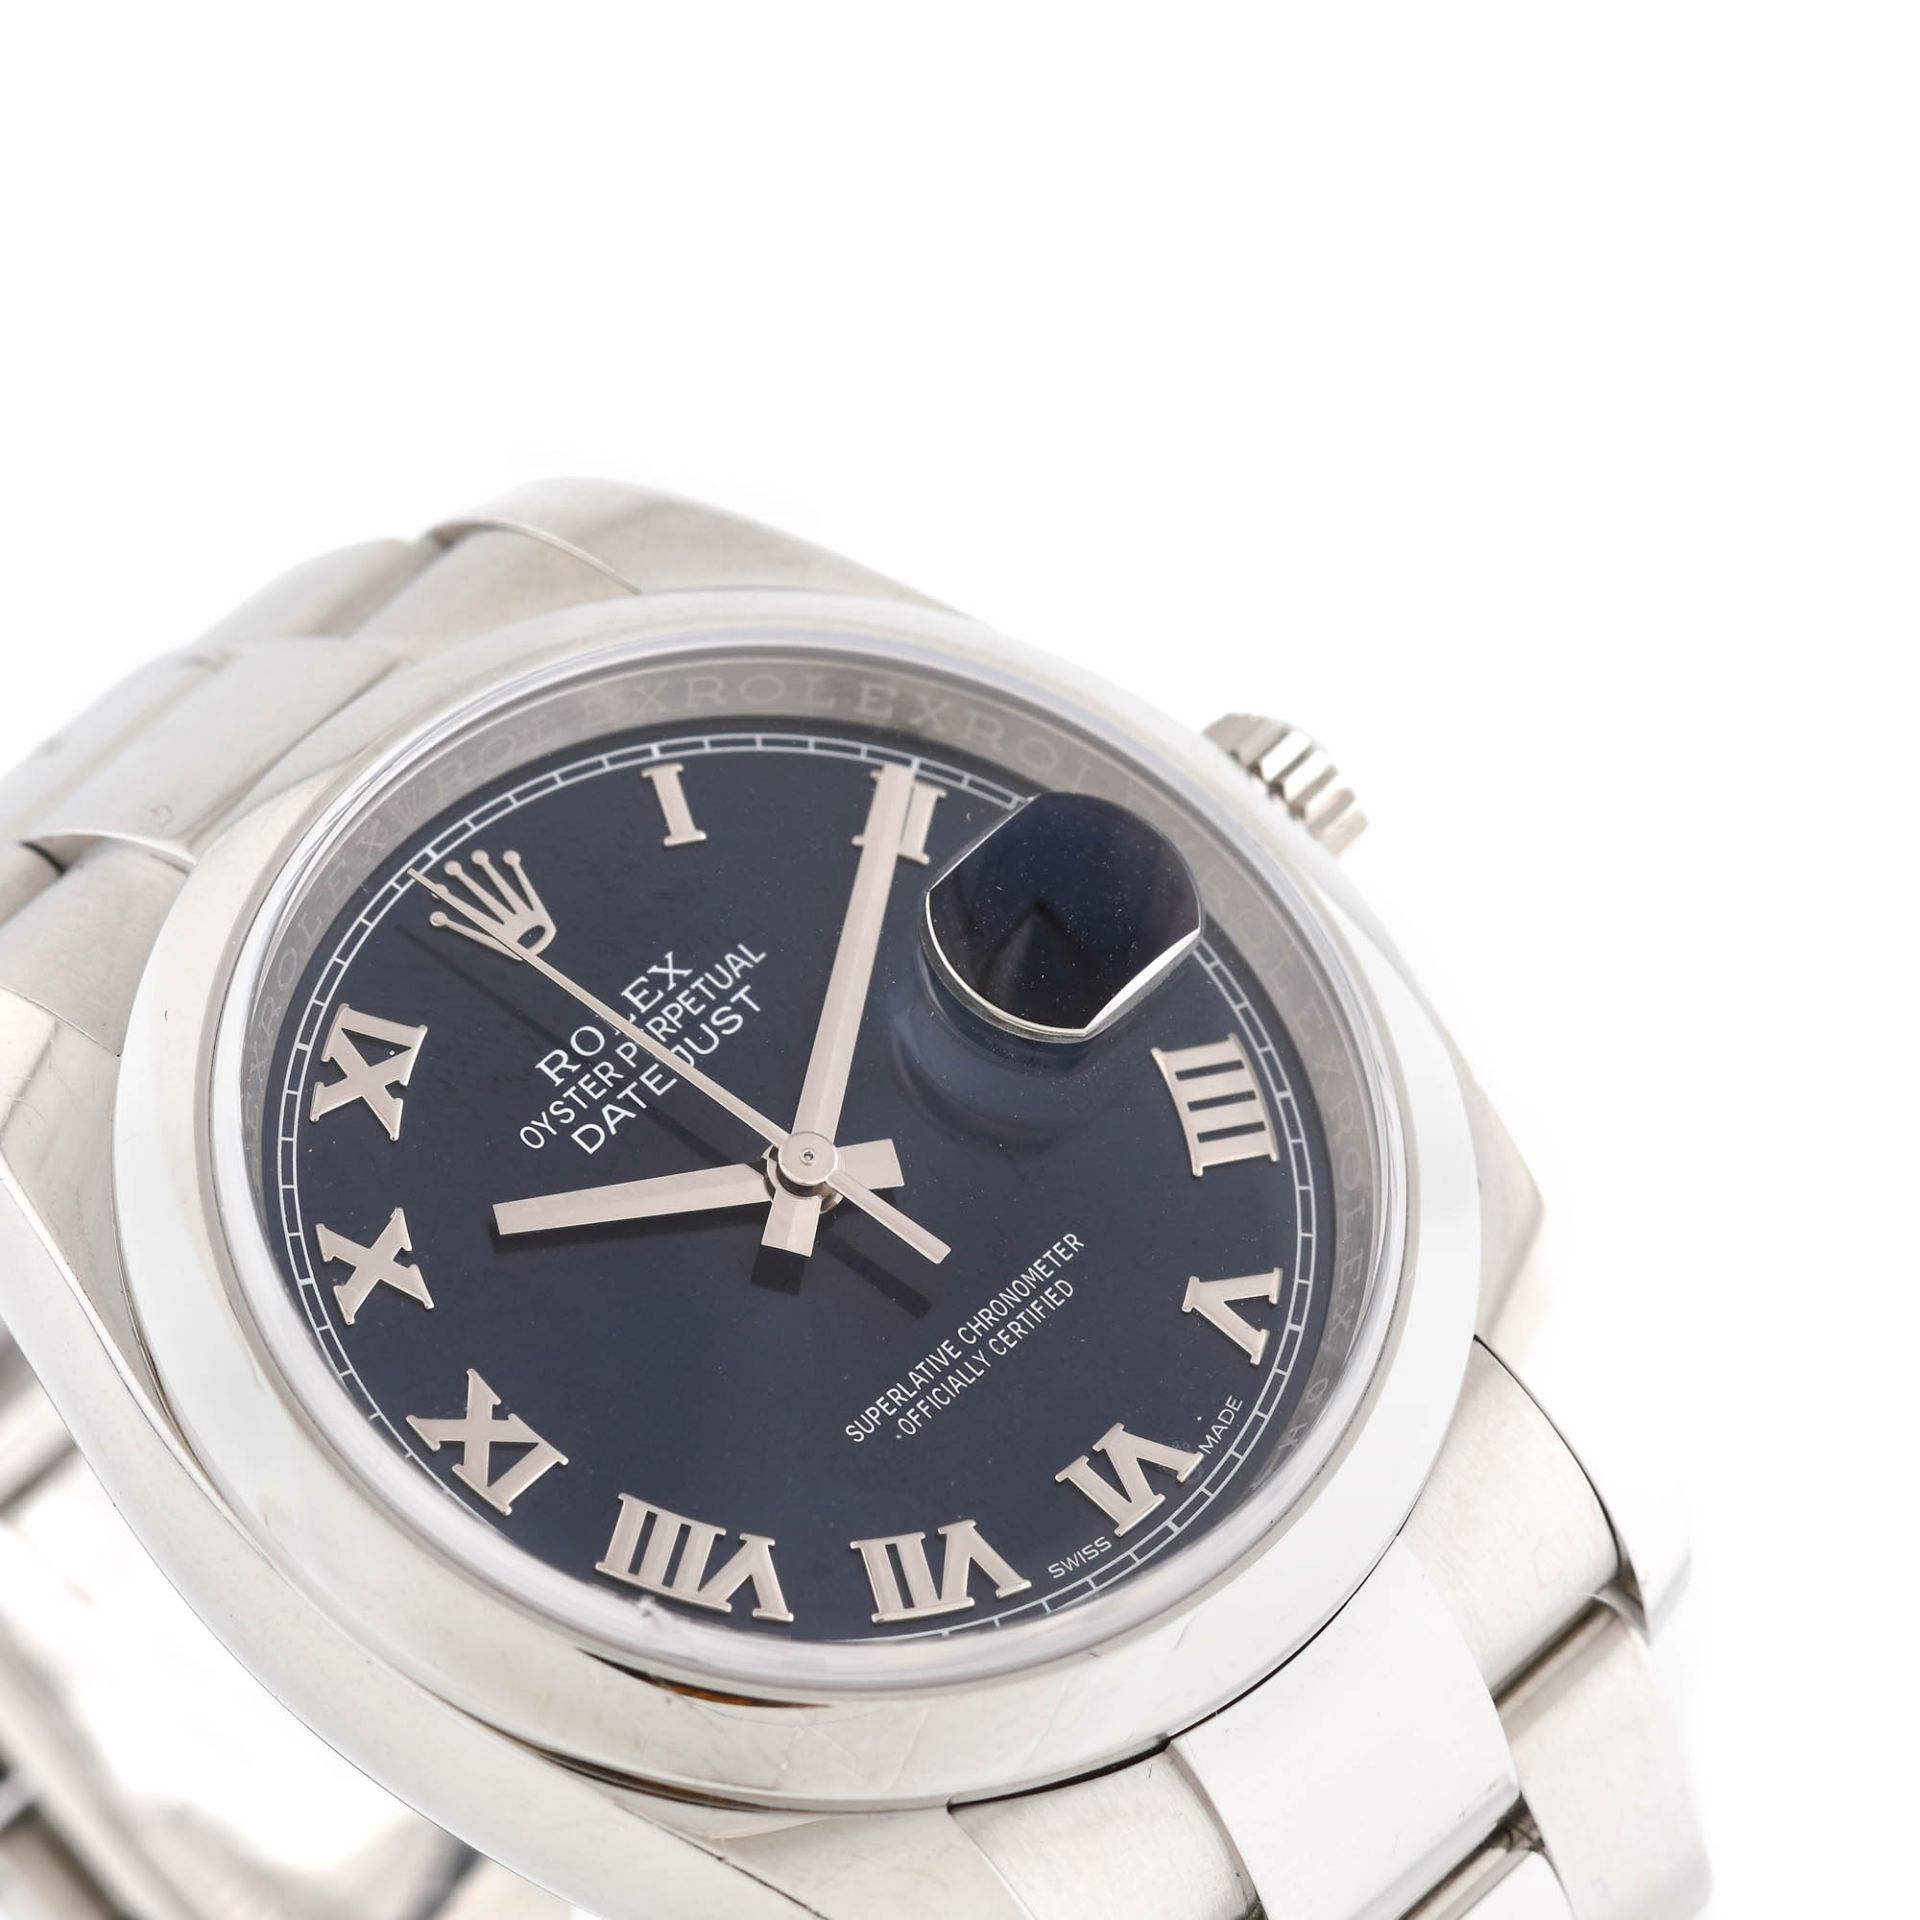 Rolex Oyster Perpetual Datejust wristwatch, menRolex Oyster Perpetual Datejust wristwatch, men, - Image 2 of 3